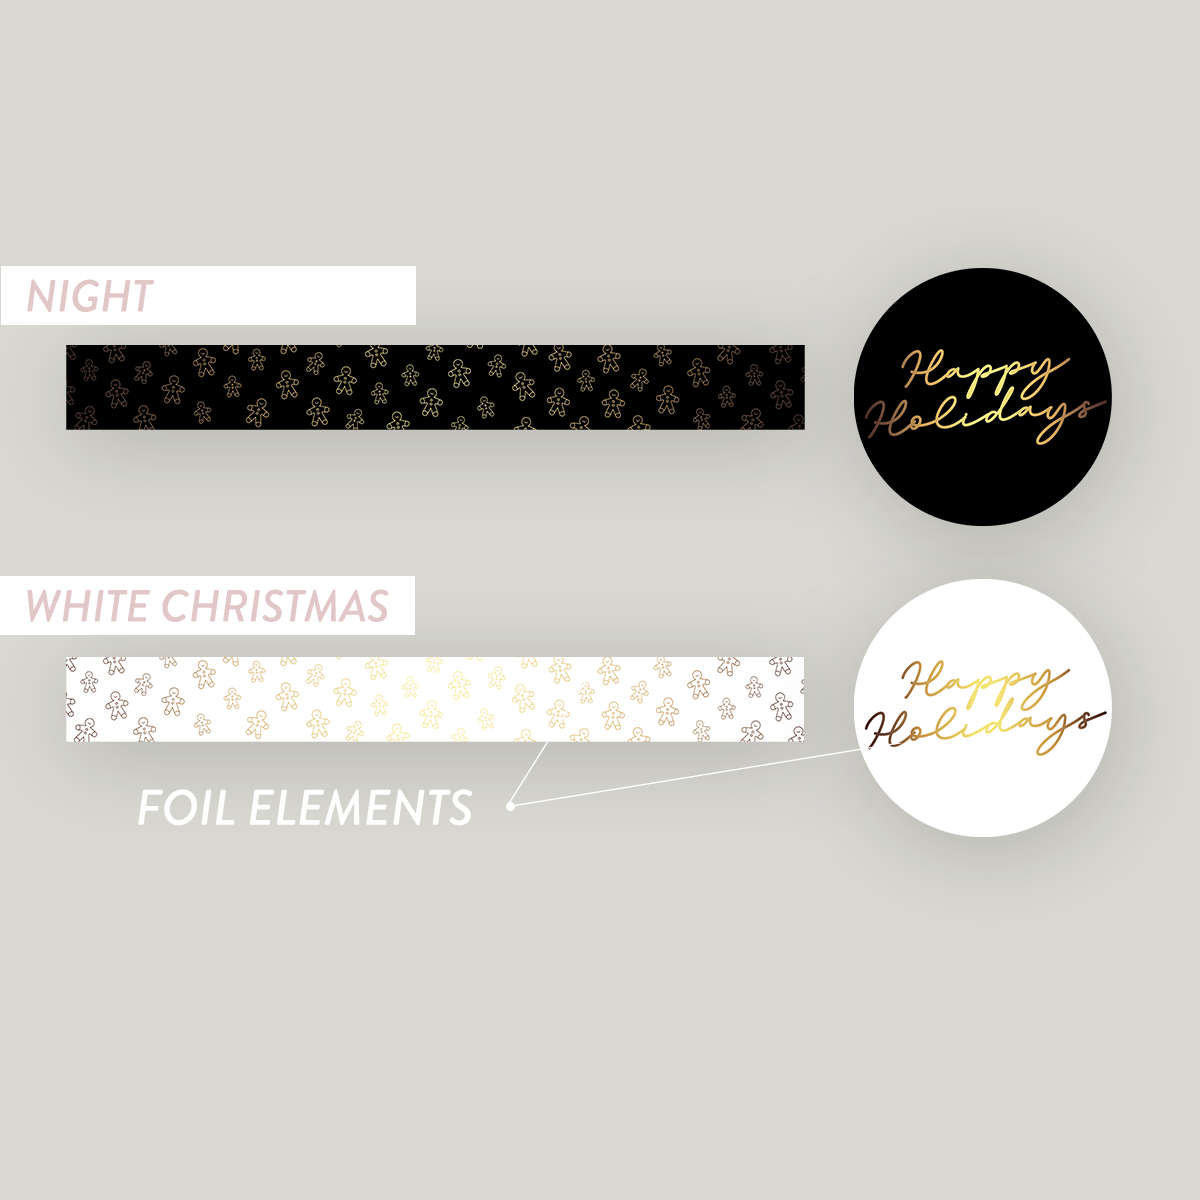 FOILED The Jewel Christmas Collection - Happy Holidays Foil Gingerbread Men Travel Tin Set Monochrome